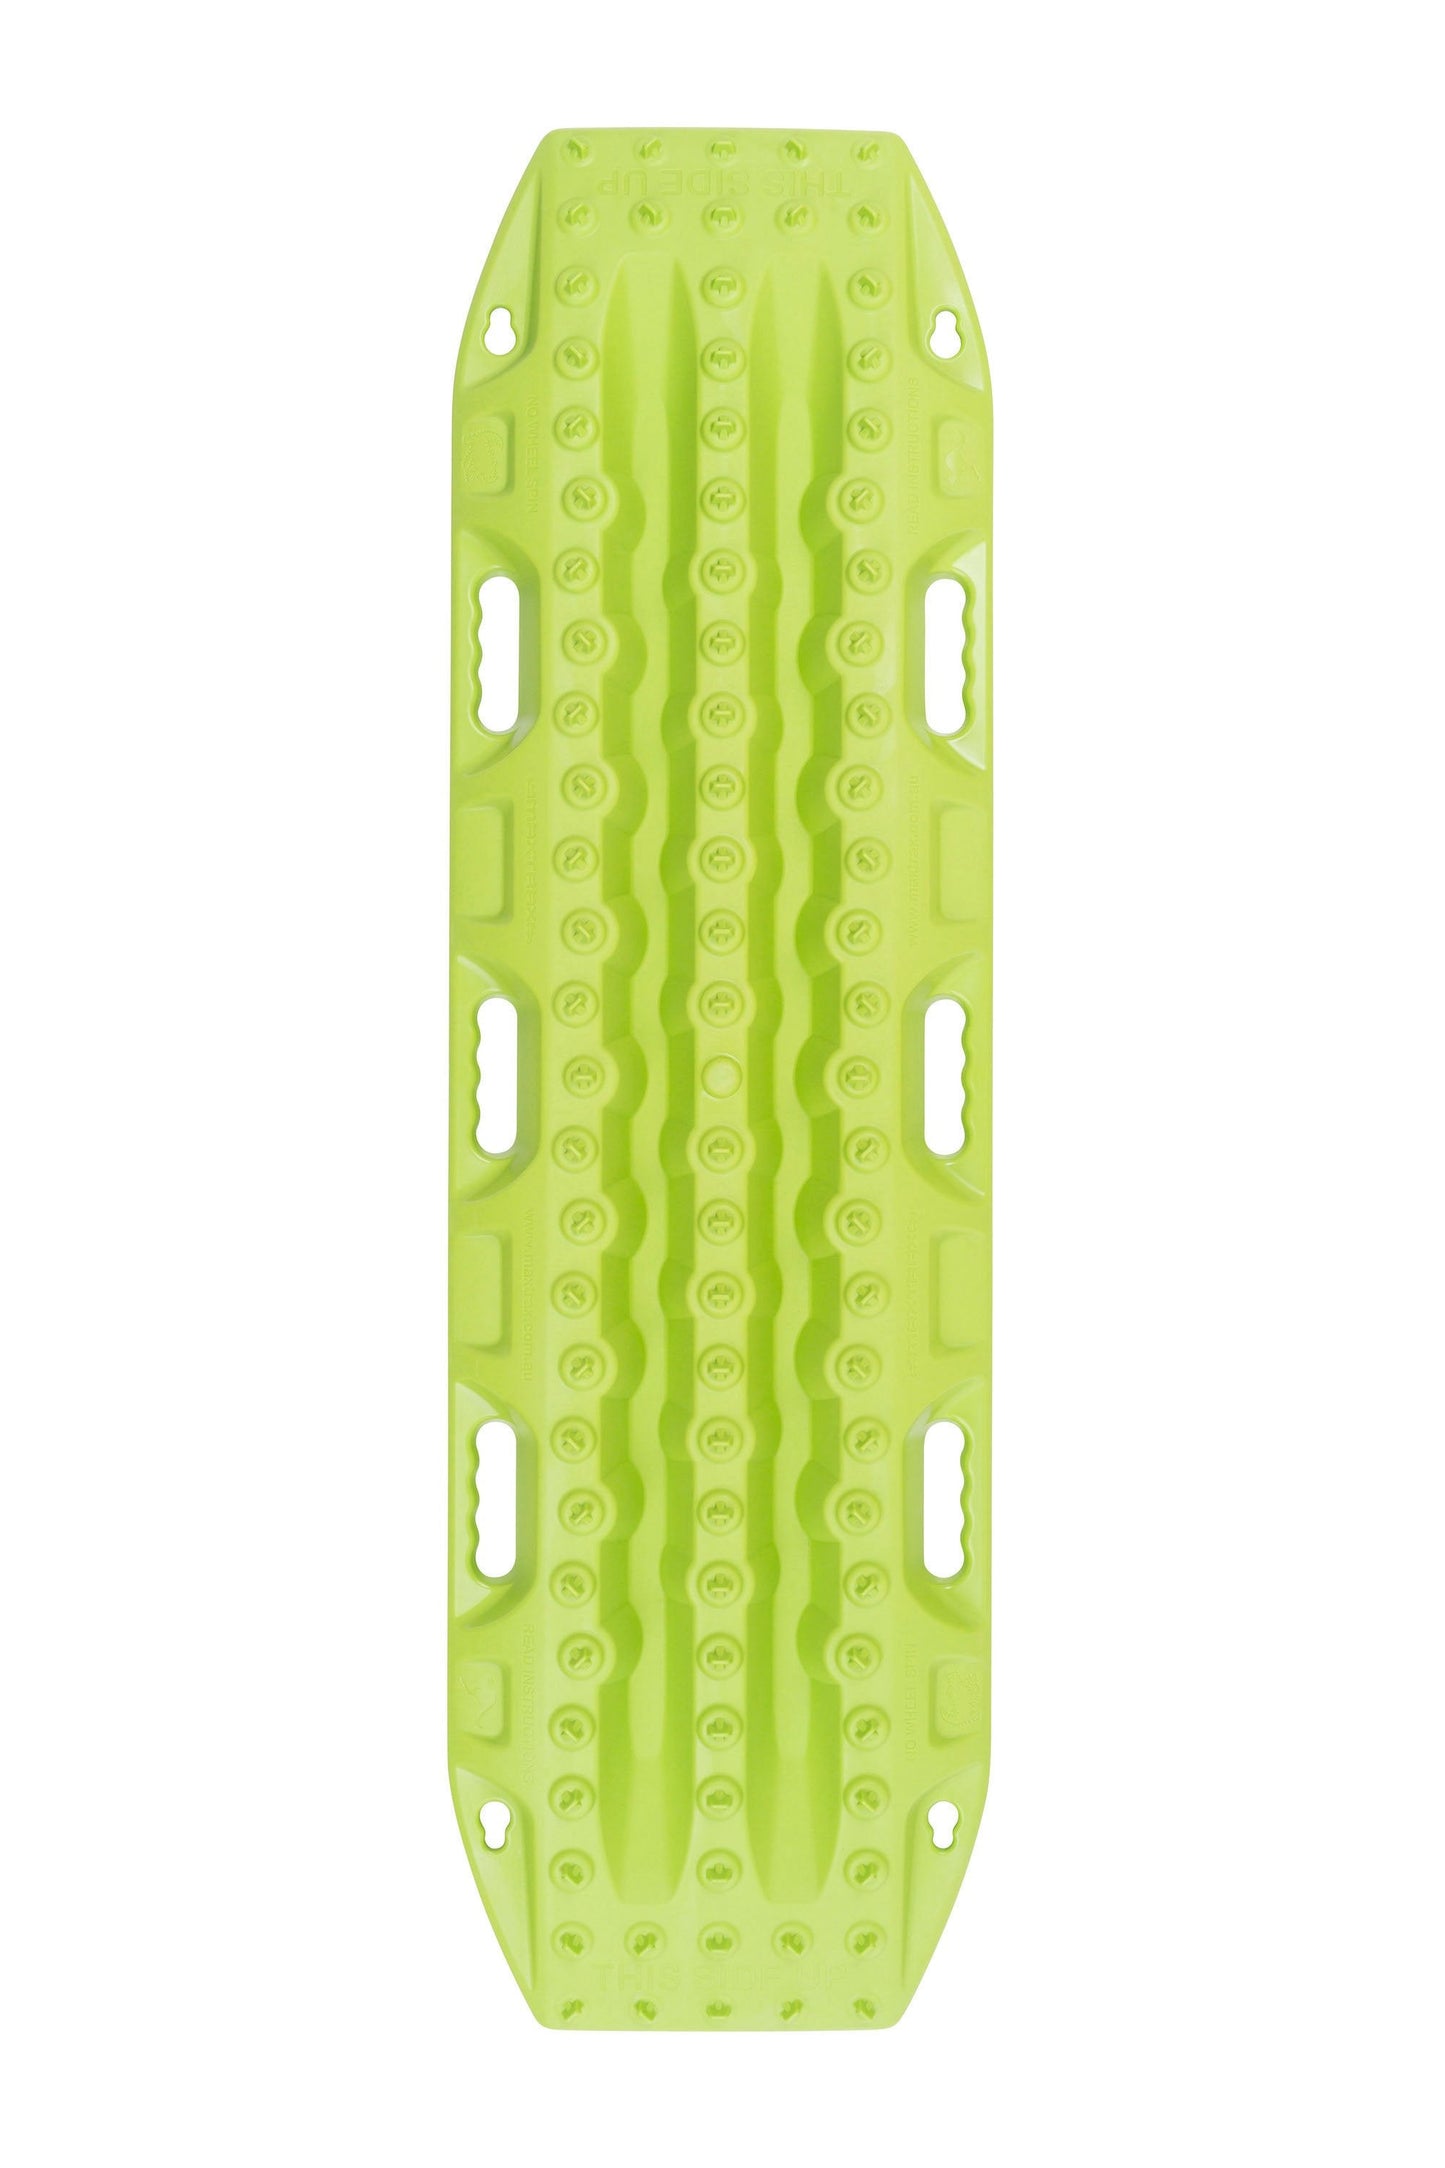 MAXTRAX MKII Lime Green Recovery Boards